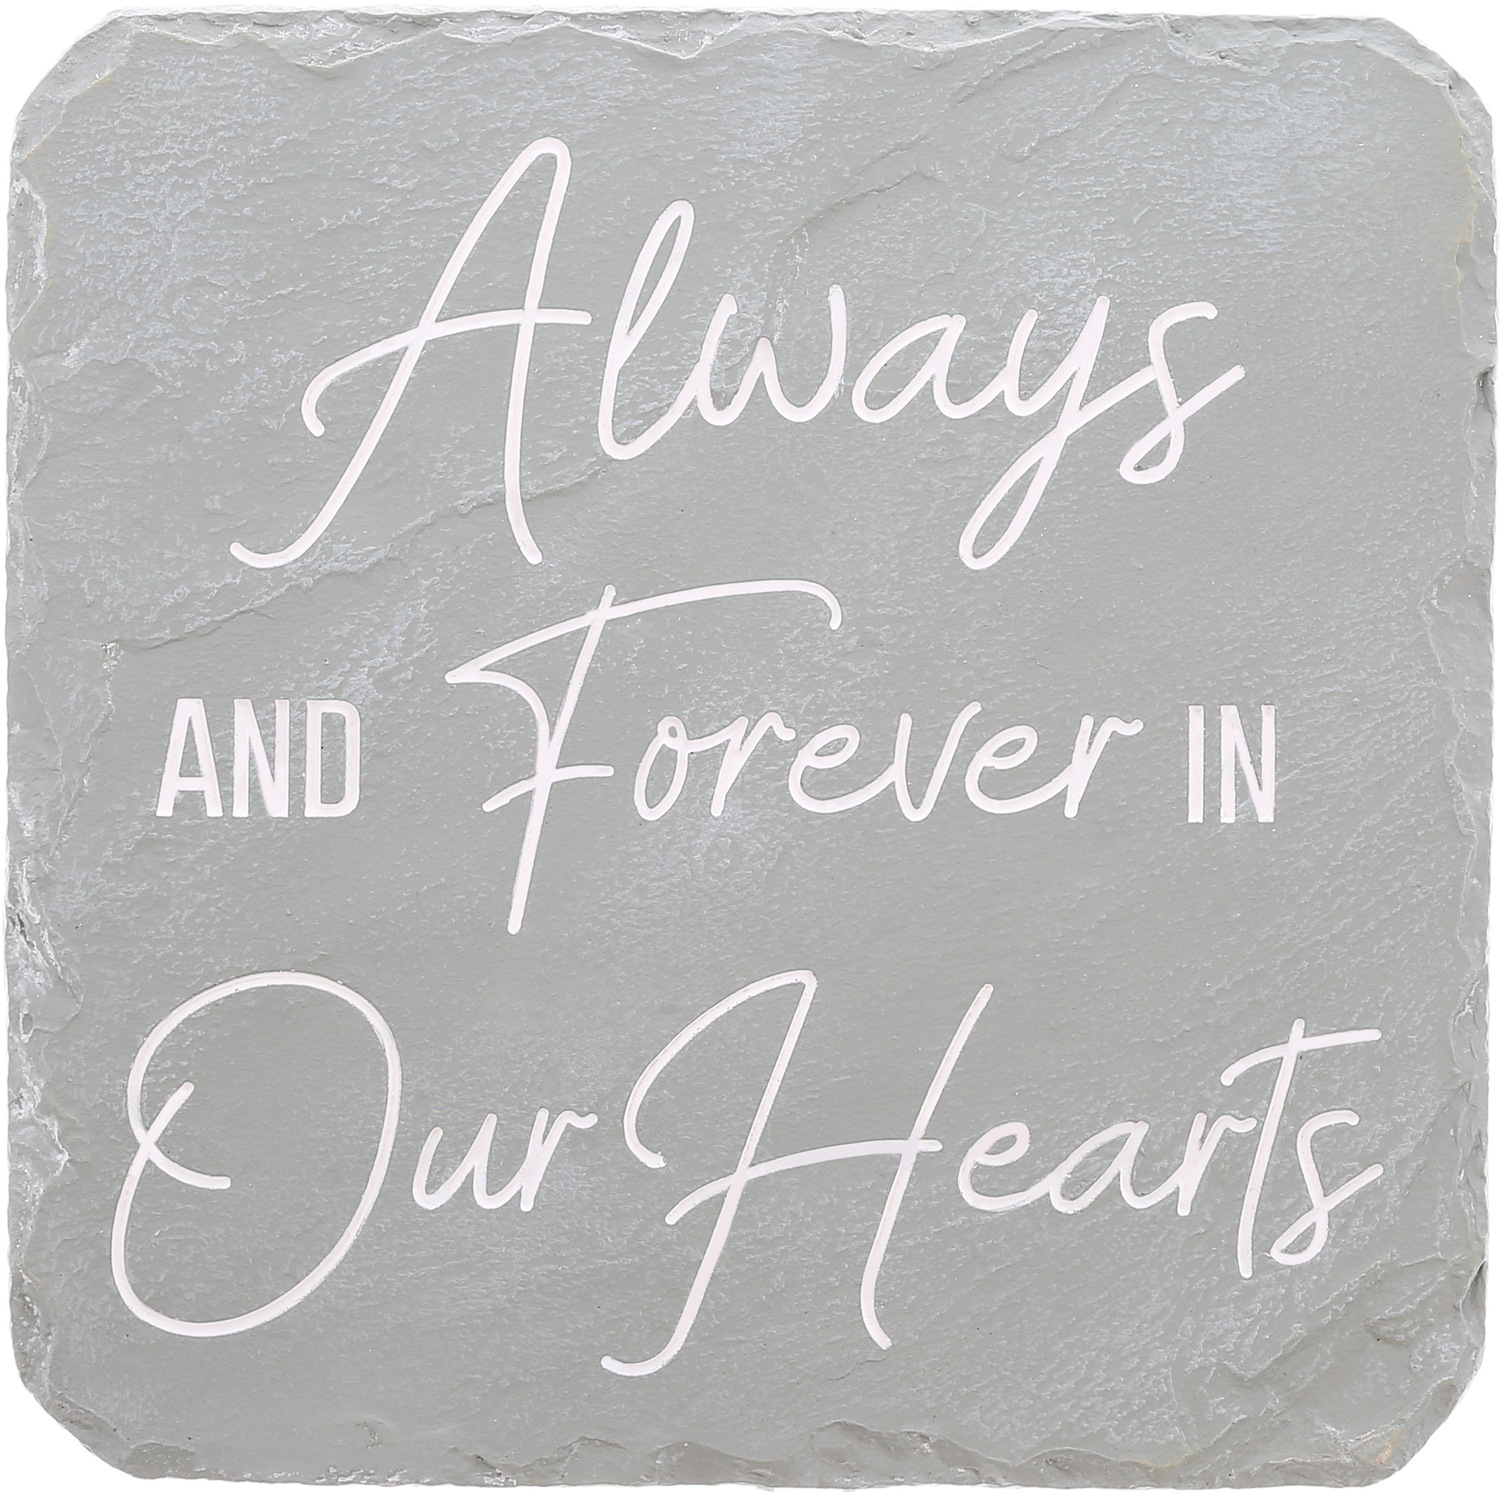 Always  & Forever by Stones with Stories - Always  & Forever - 7.75" x 7.75" Garden Stone